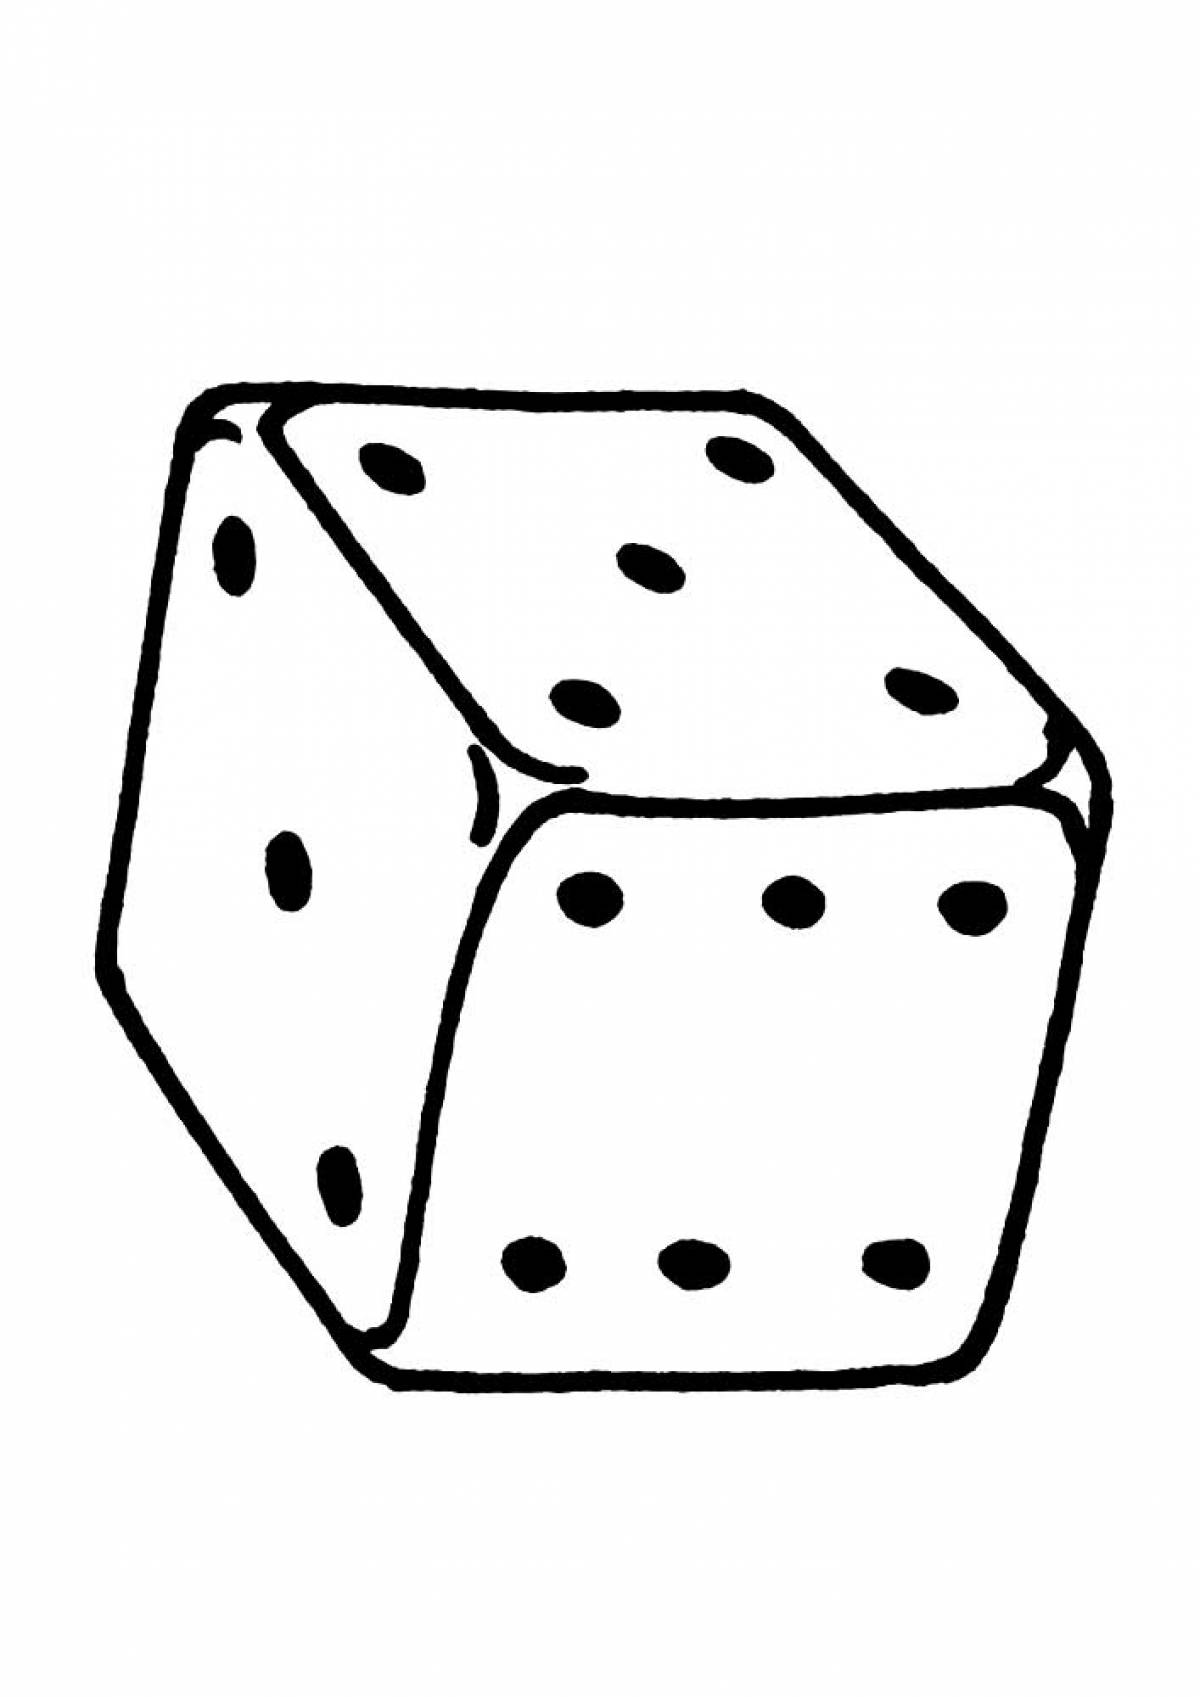 Cube with dots